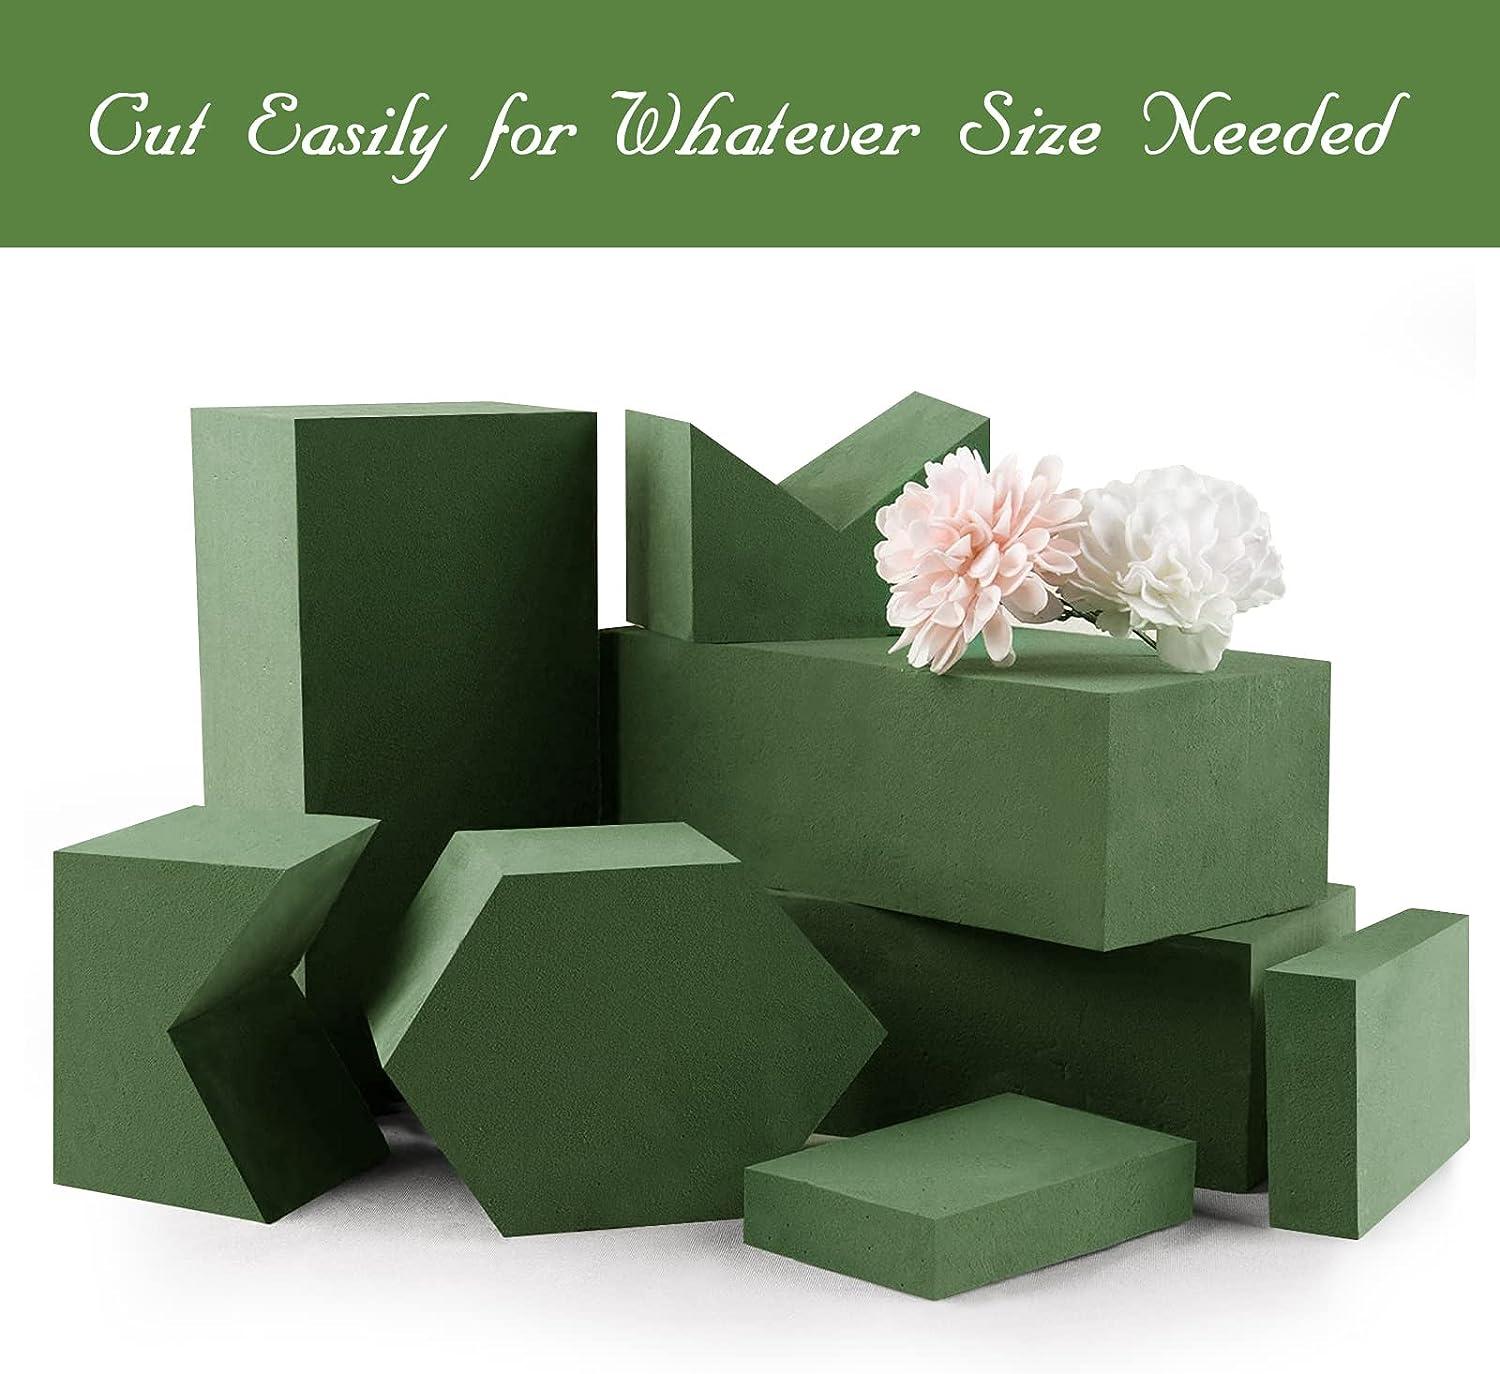 FLOFARE Pack of 8 Dry and Wet Floral Foam Blocks for Fresh and Artificial  Flowers, Each (7.8” L x 3.5” W x 2.4” H), for Wedding, Birthdays, Home